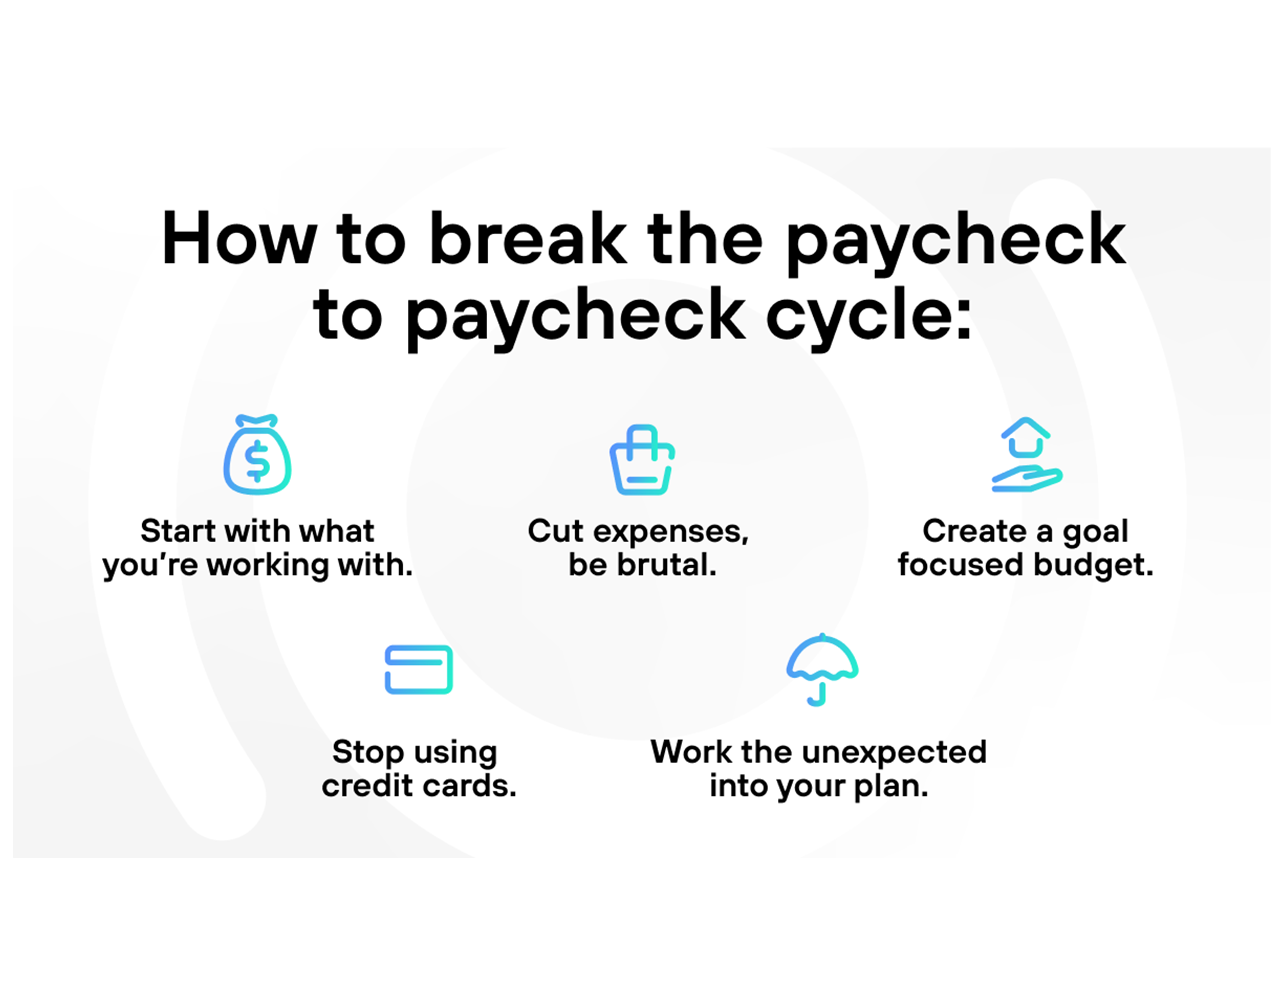 Image showing various ways to stop living paycheck to paycheck